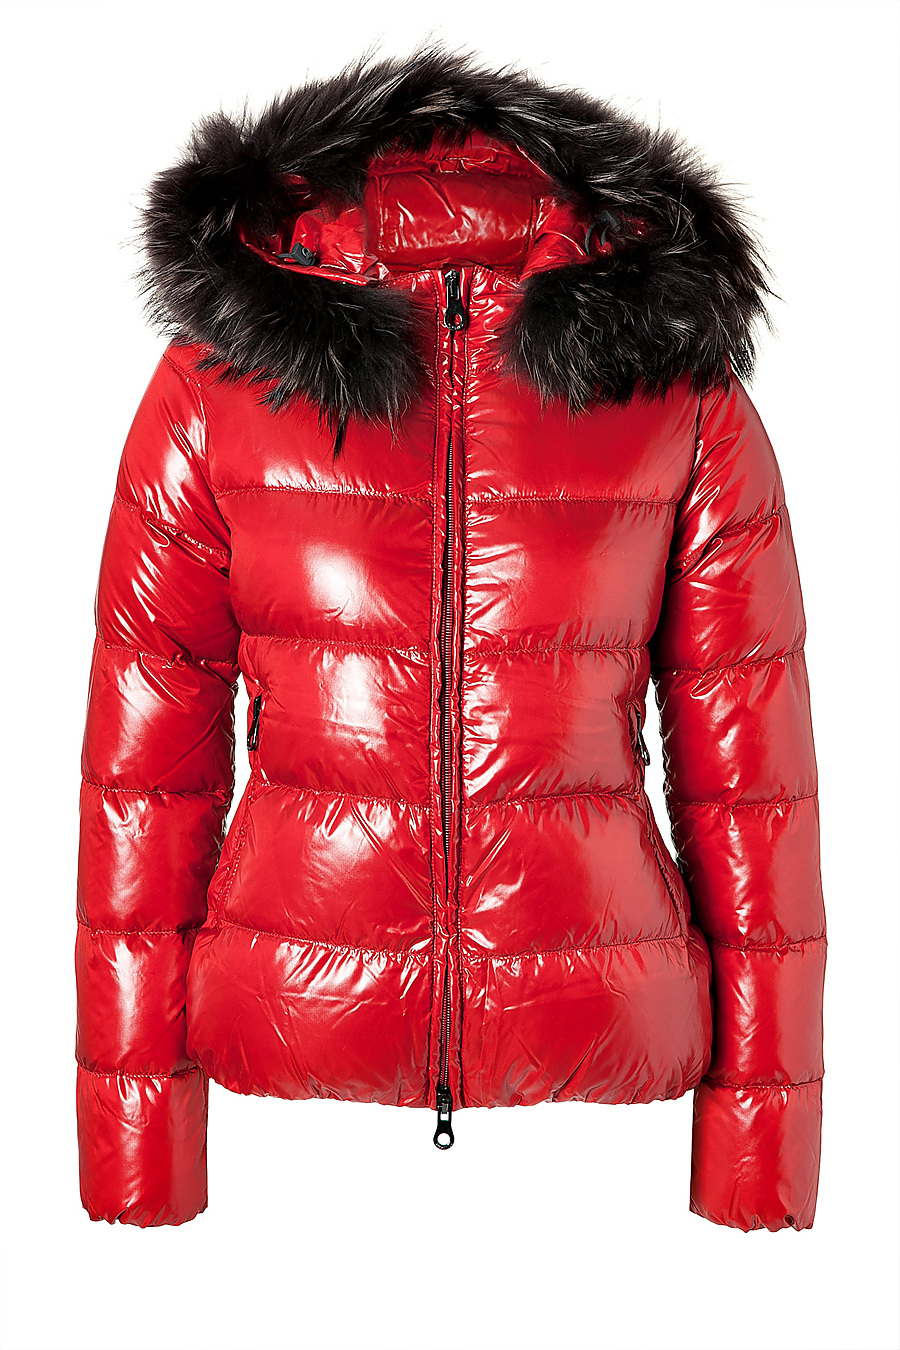 Duvetica Adhara Down Jacket with Fur-Trimmed Hood